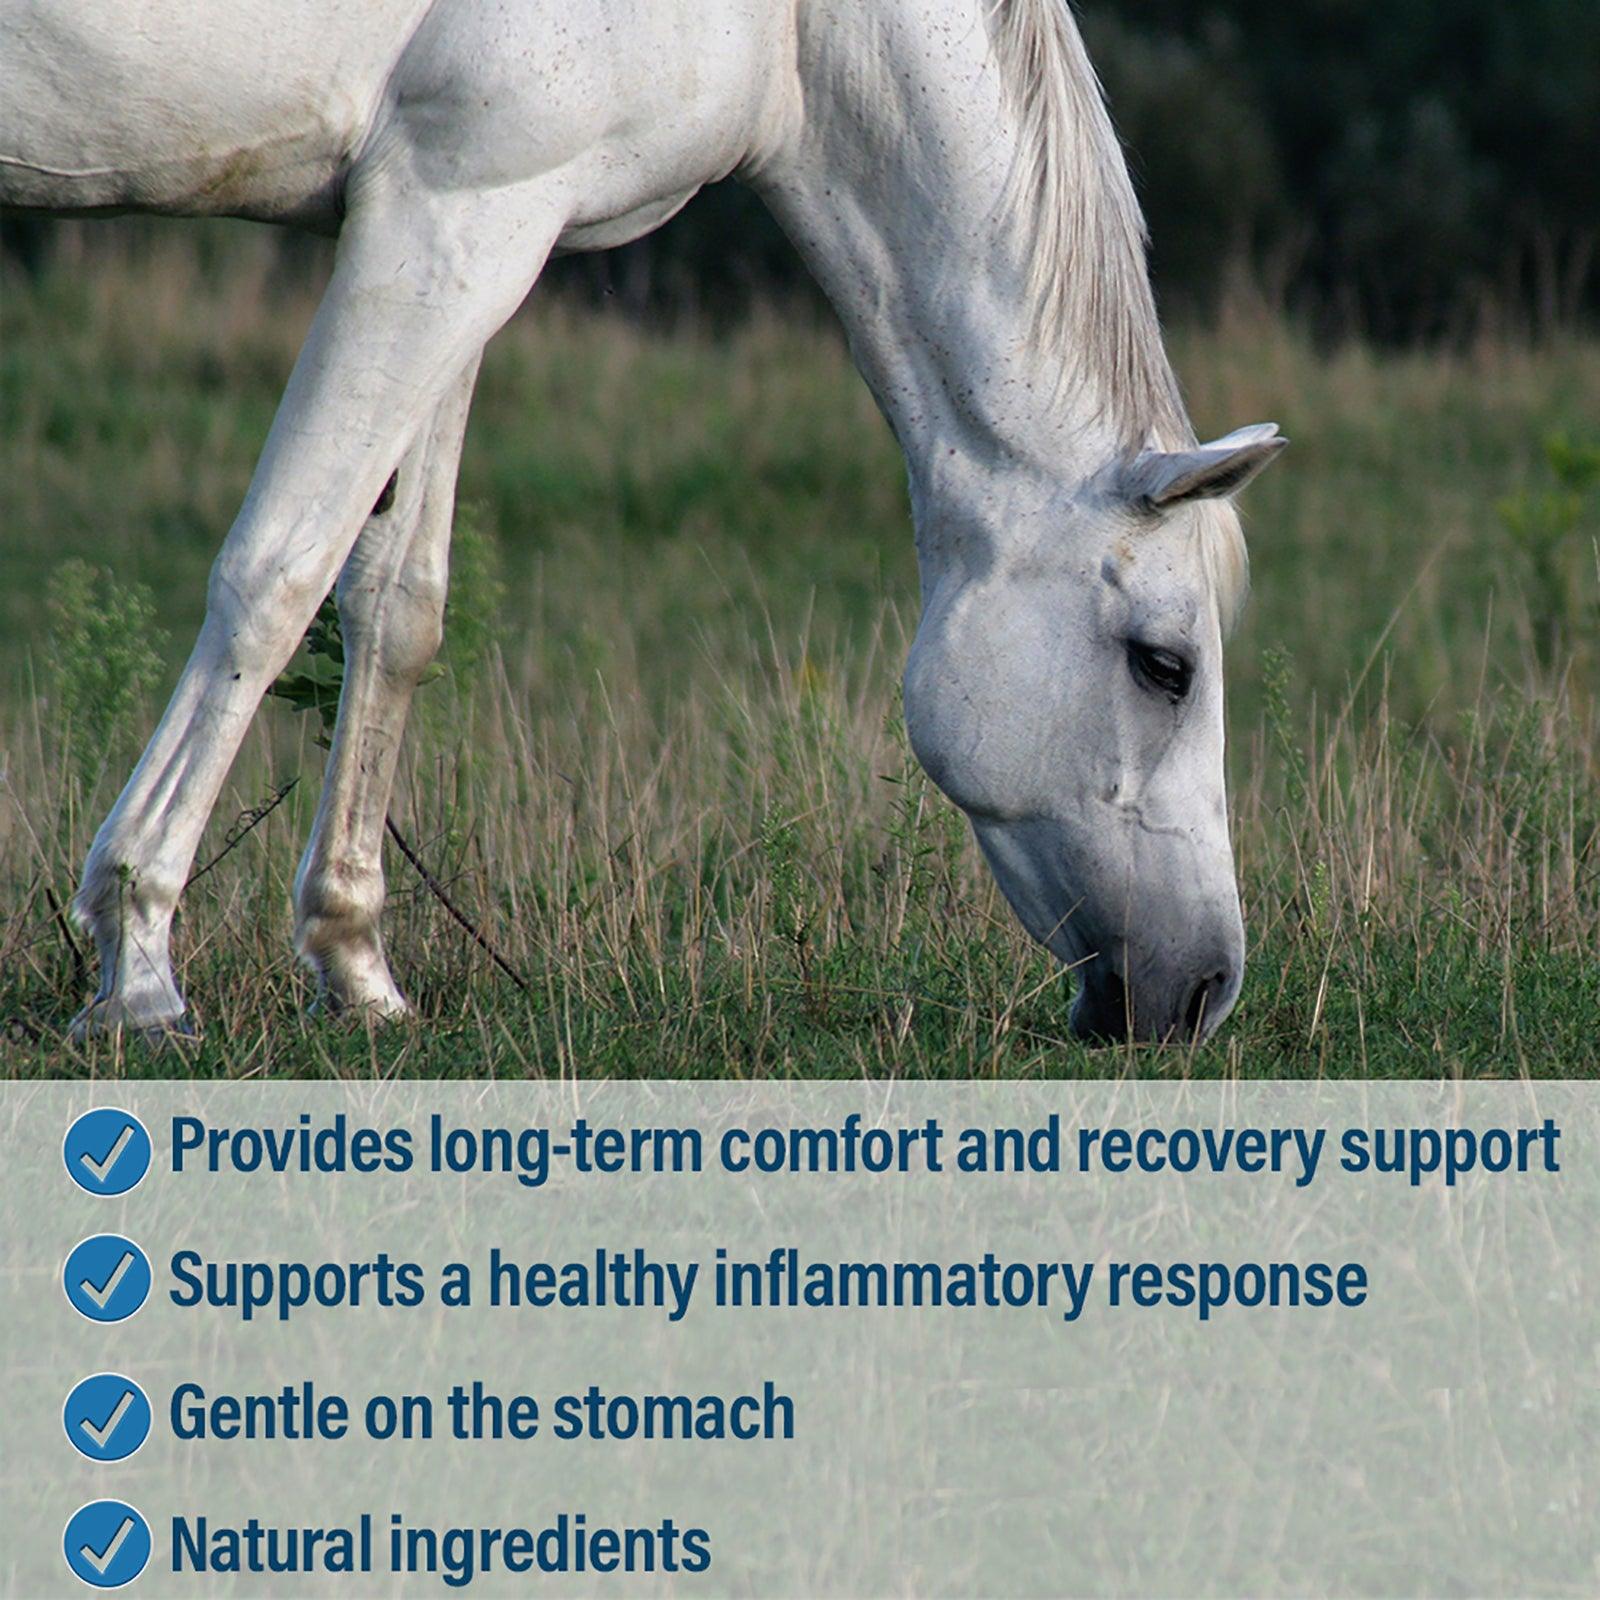 White horse grazing in the field, caption Provides long-term comfort and recovery support.  Supports a healthy inflammatory response.  Gentle on the stomach. Made with natural ingredients.